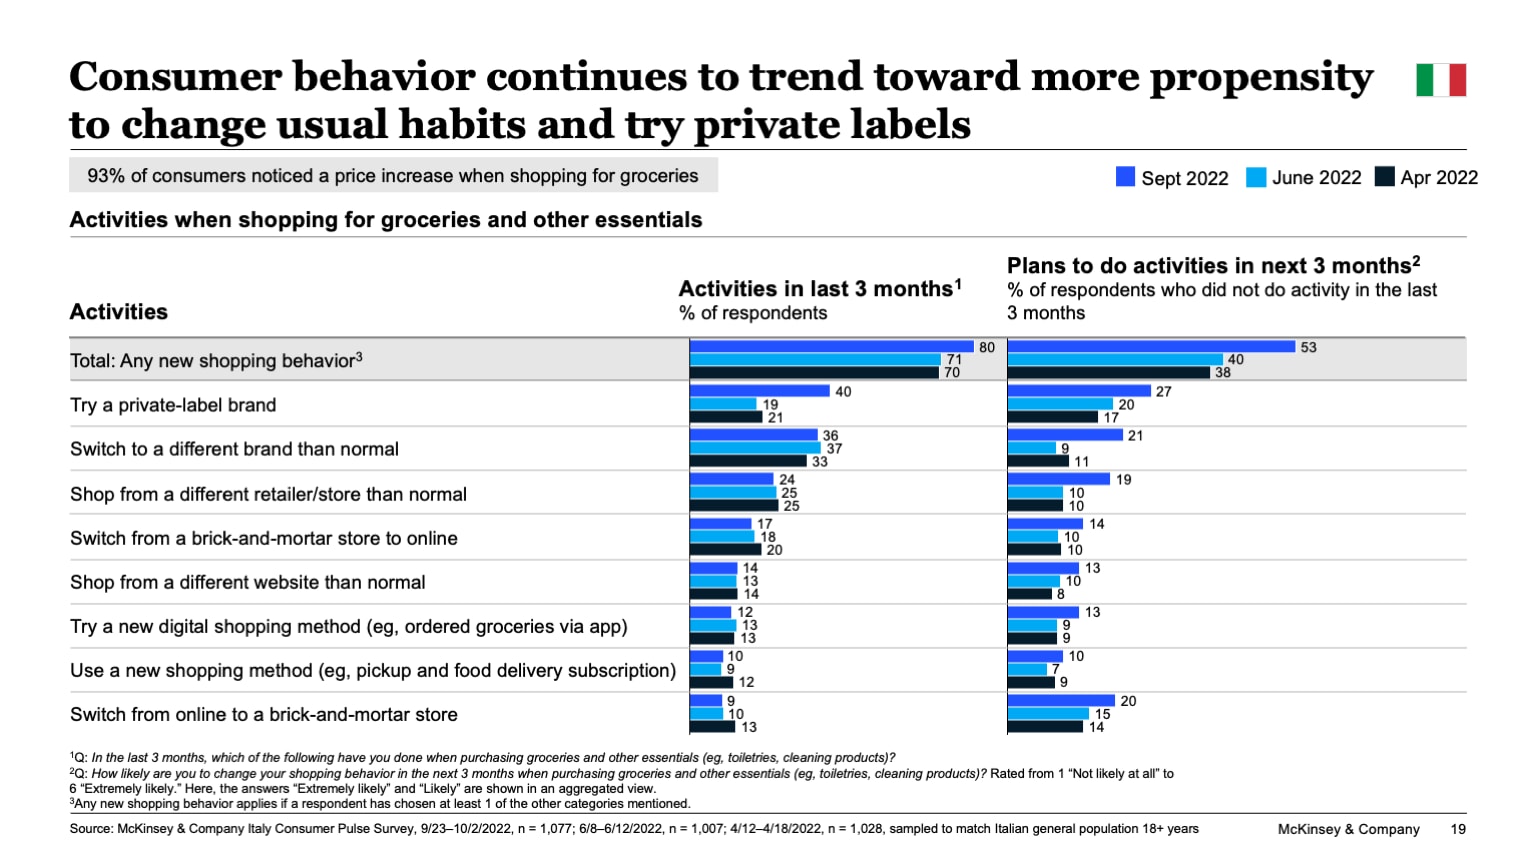 Consumer behavior continues to trend toward more propensity to change usual habits and try private labels